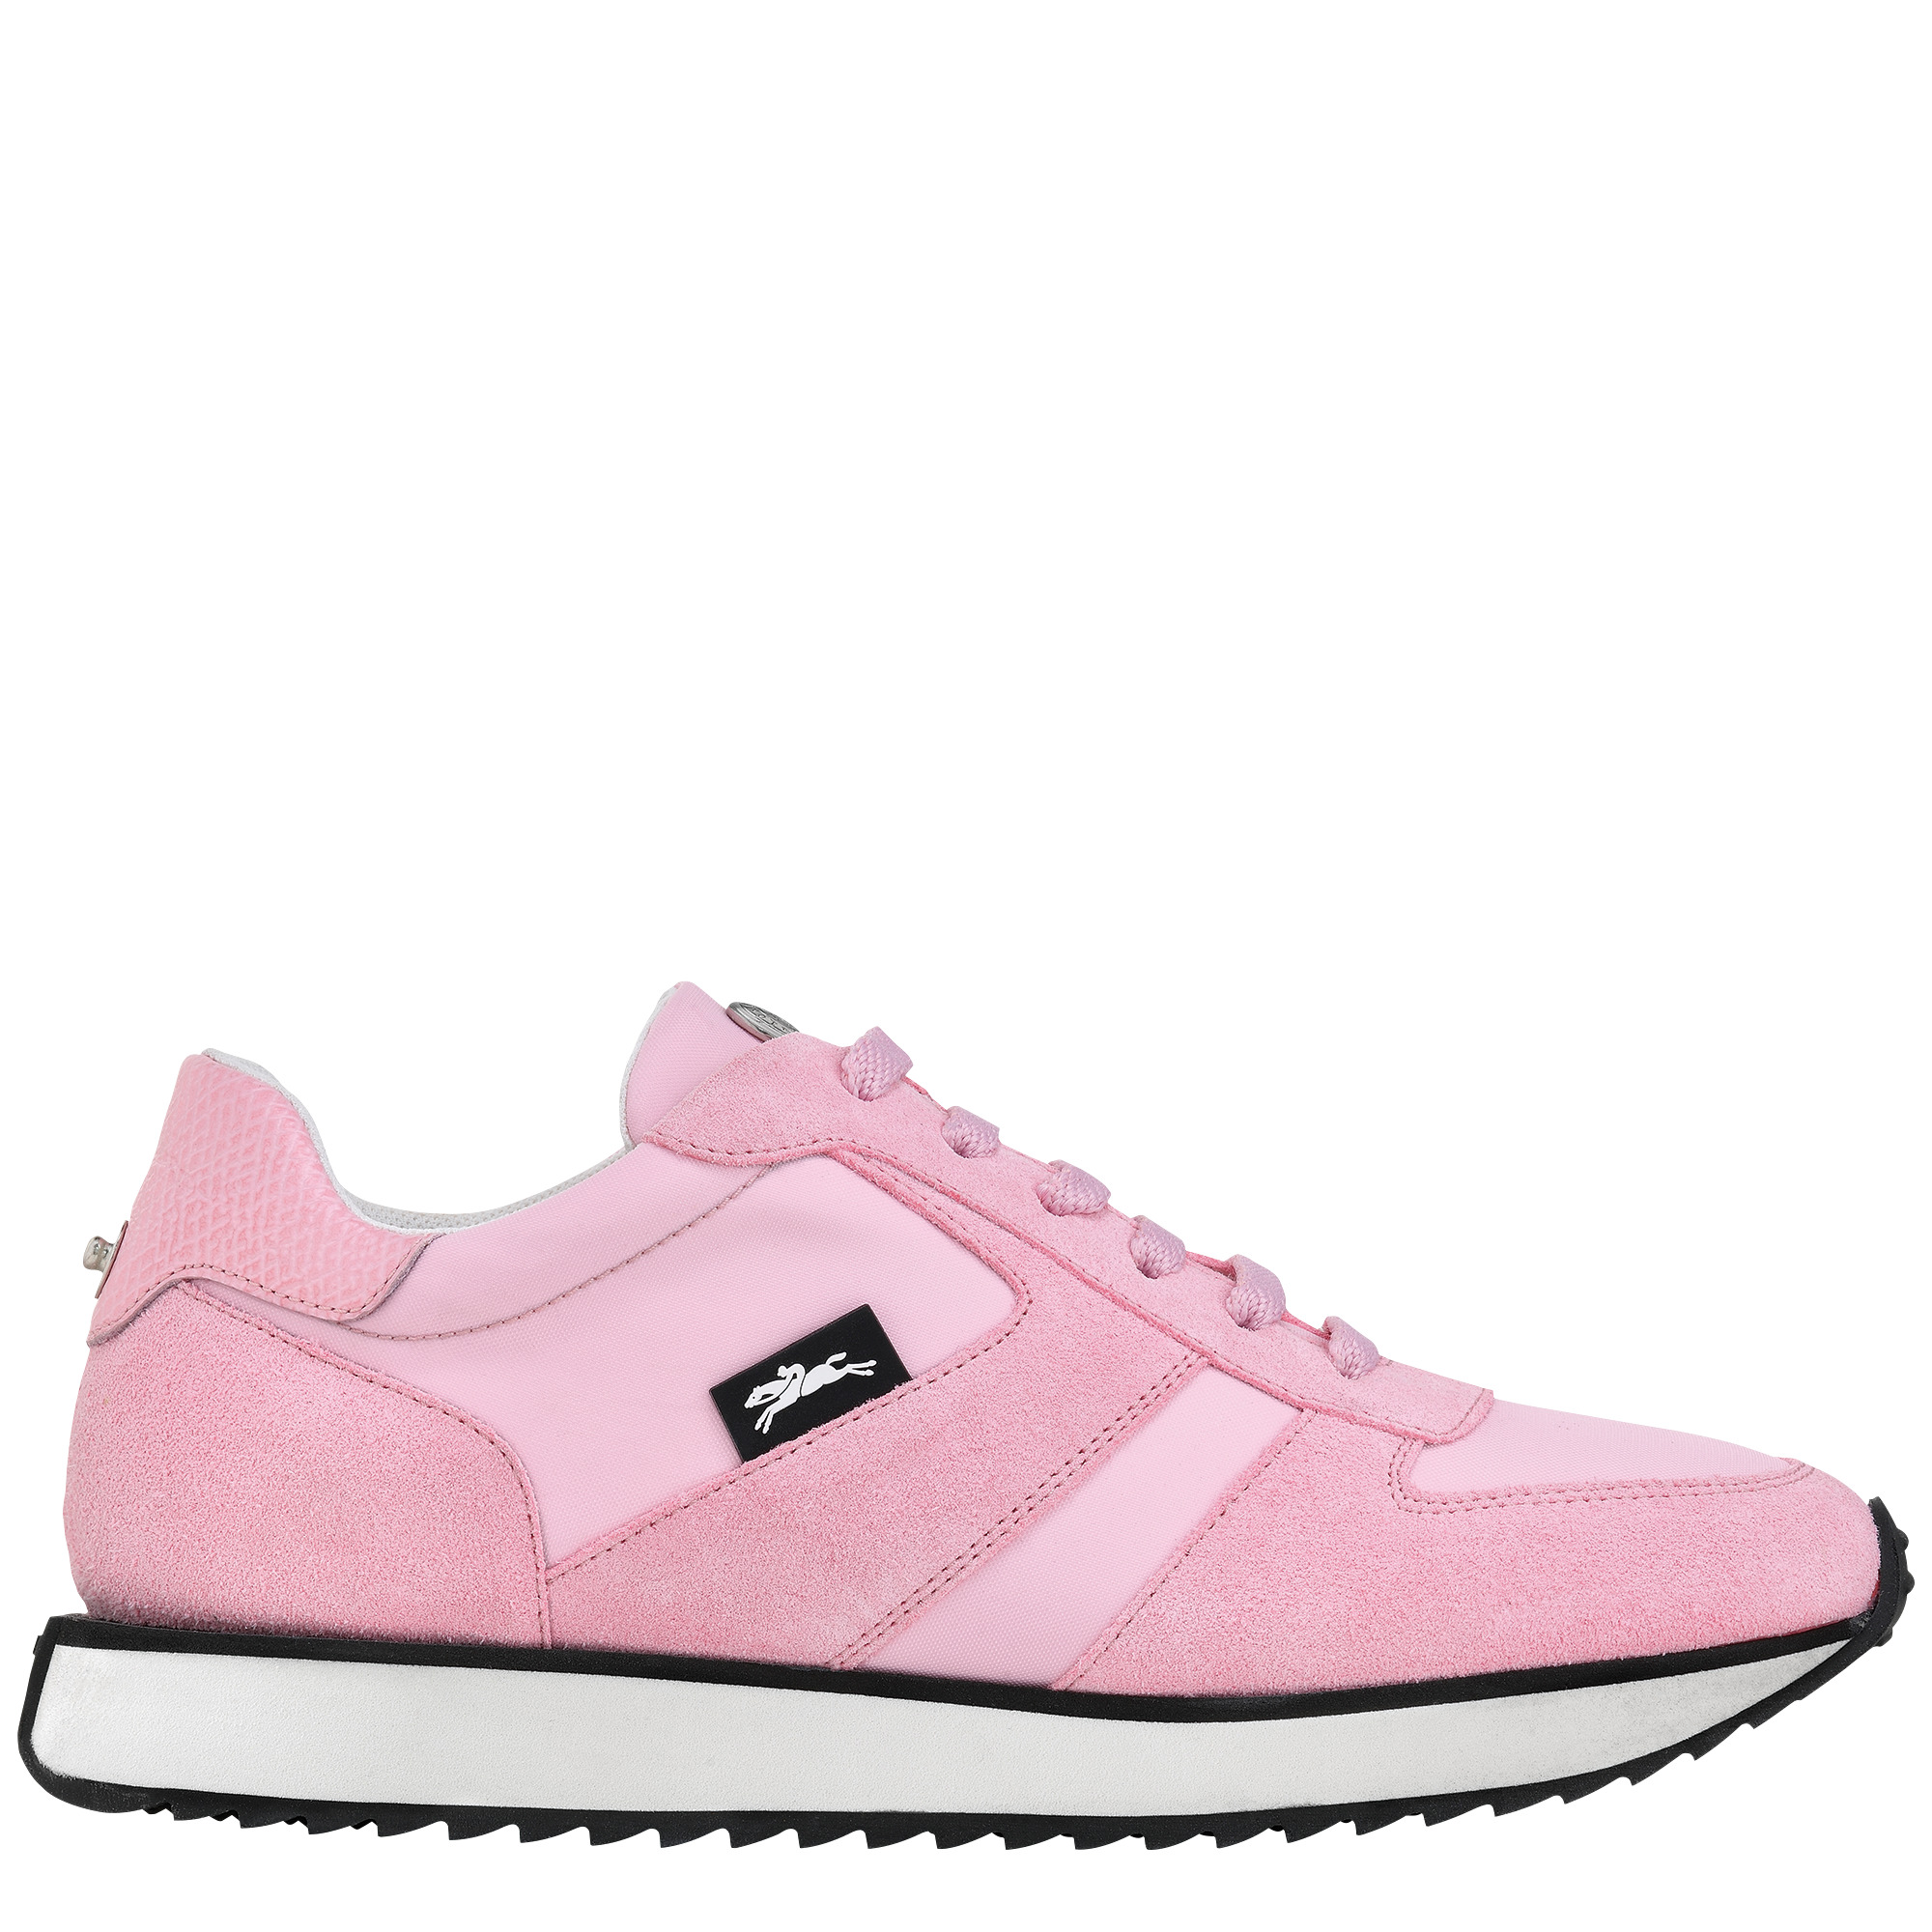 Le Pliage Green Sneakers Pink - Leather - 1